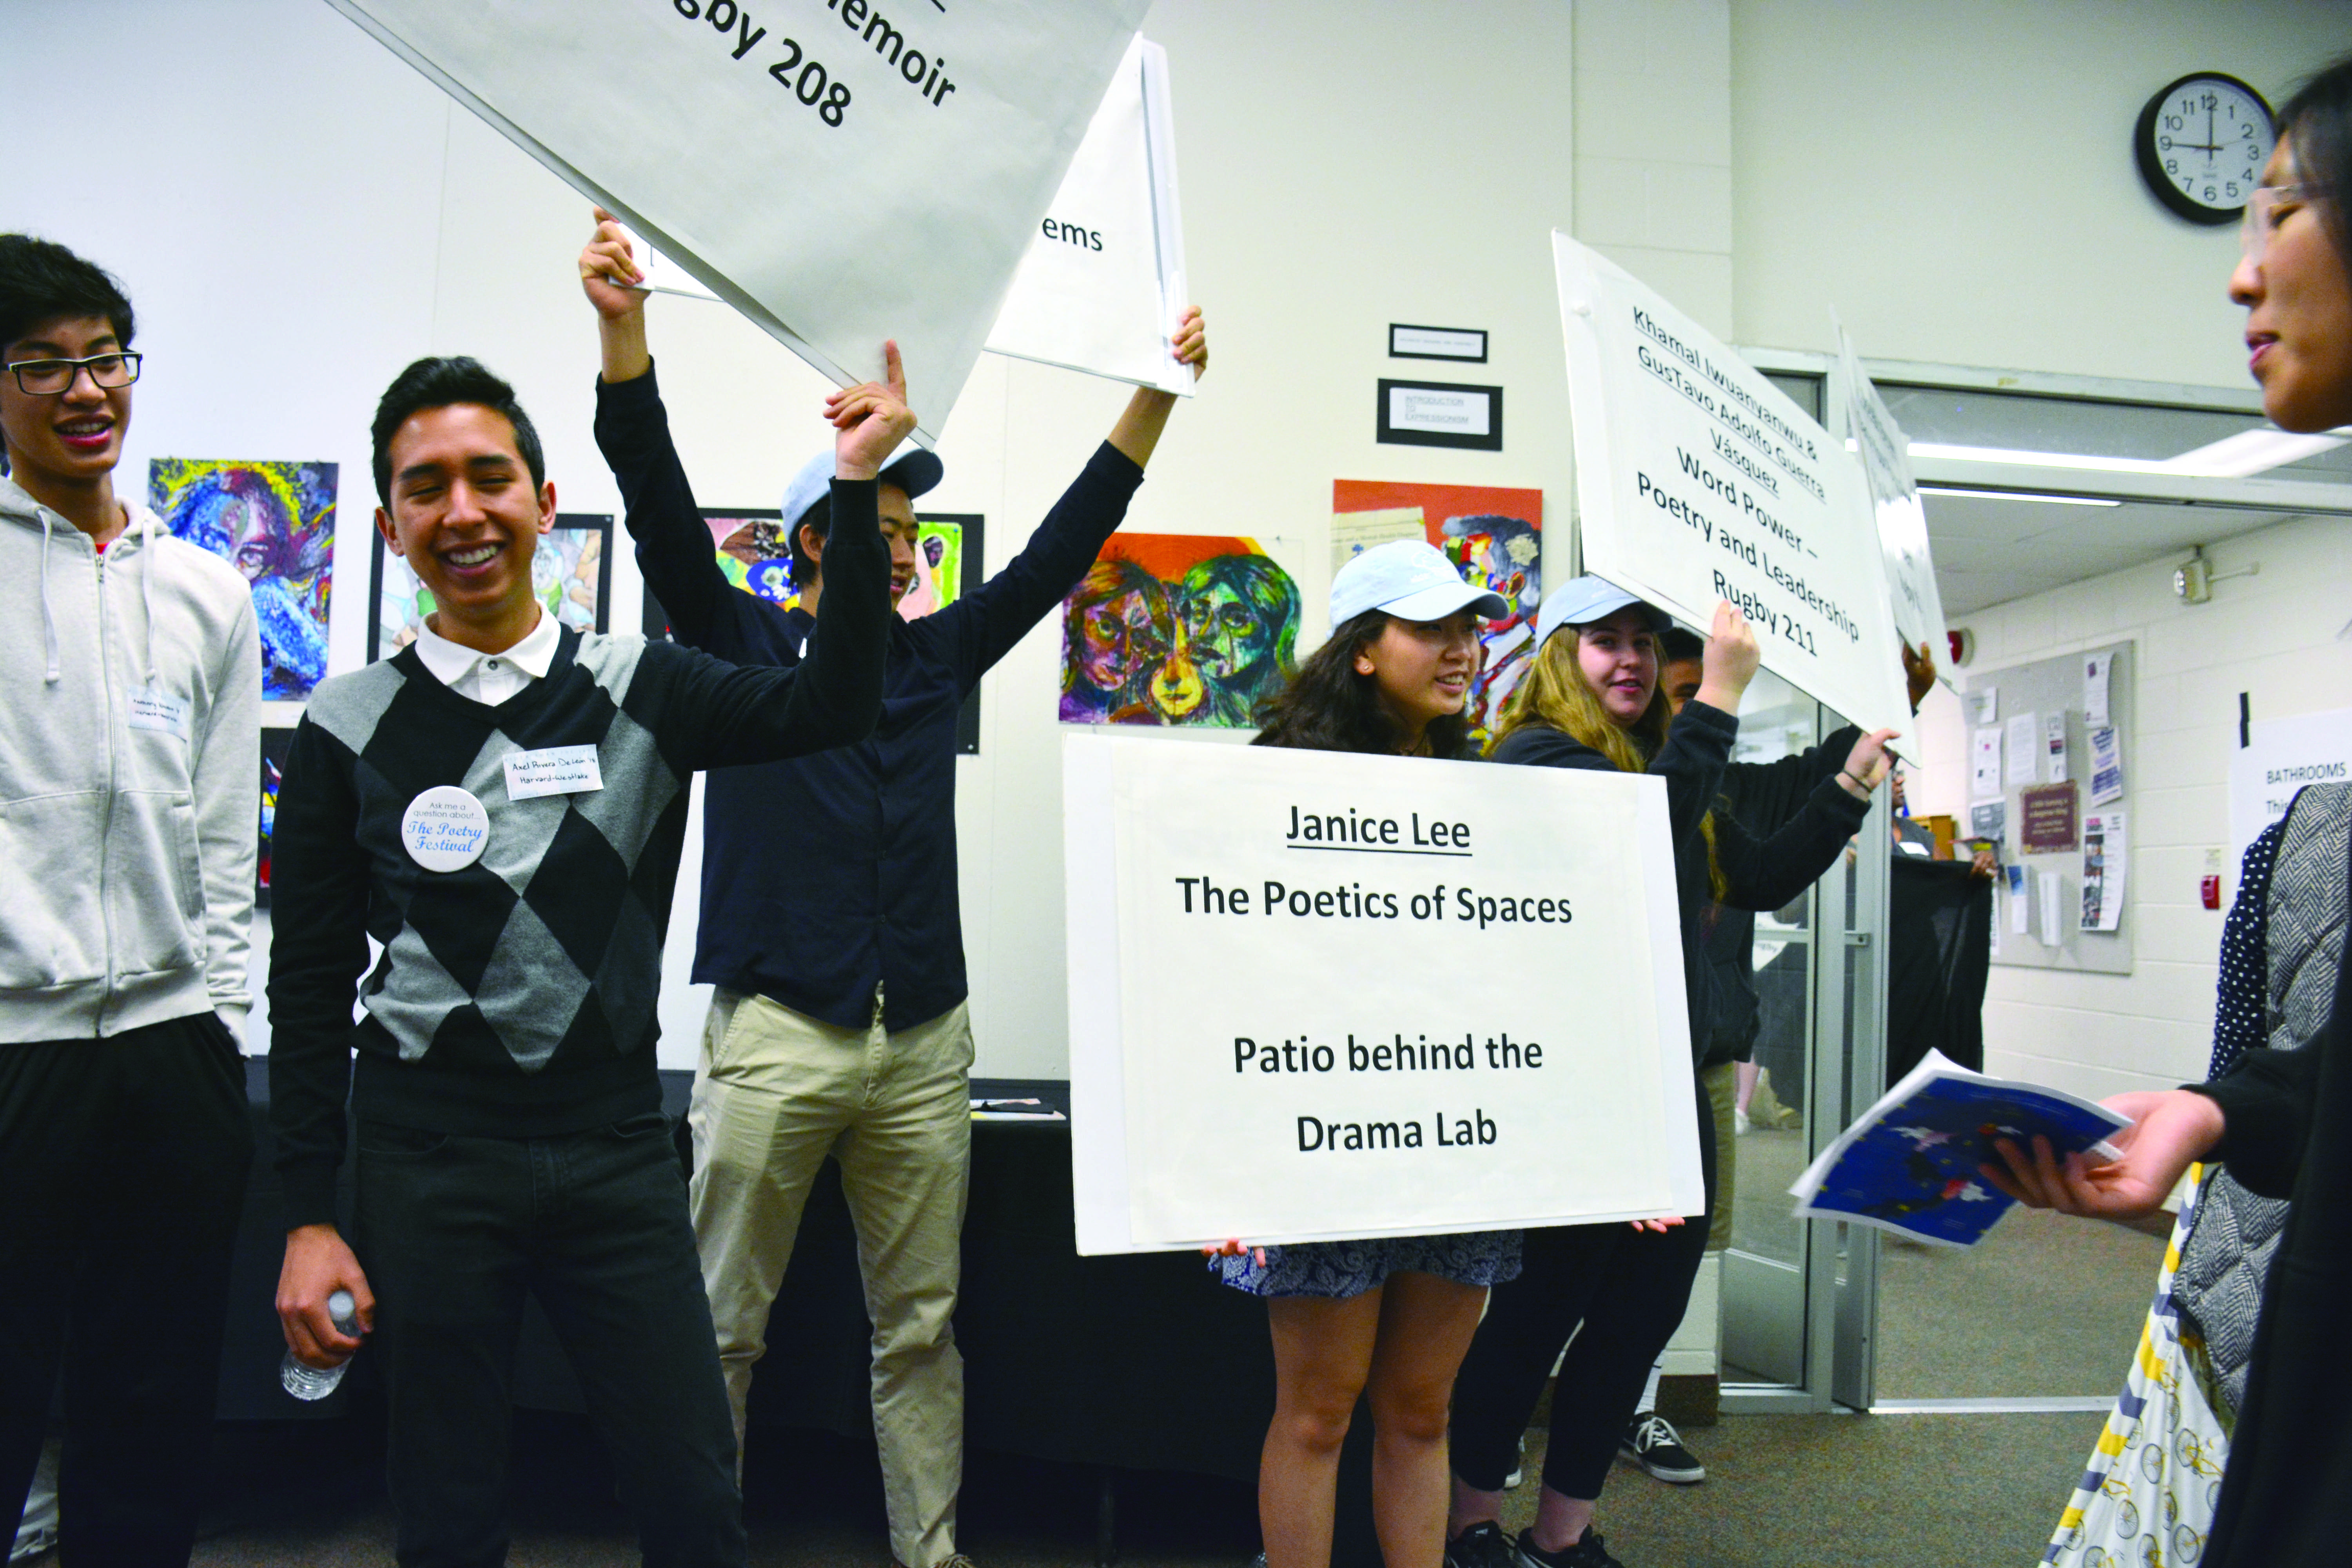 HUMAN DIRECTORIES: Harvard-Westlake ambassadors for “Wider than the Sky: A Young People’s Poetry Festival” hold up signs to direct festival participants. Credit: Teresa Suh/Chronicle